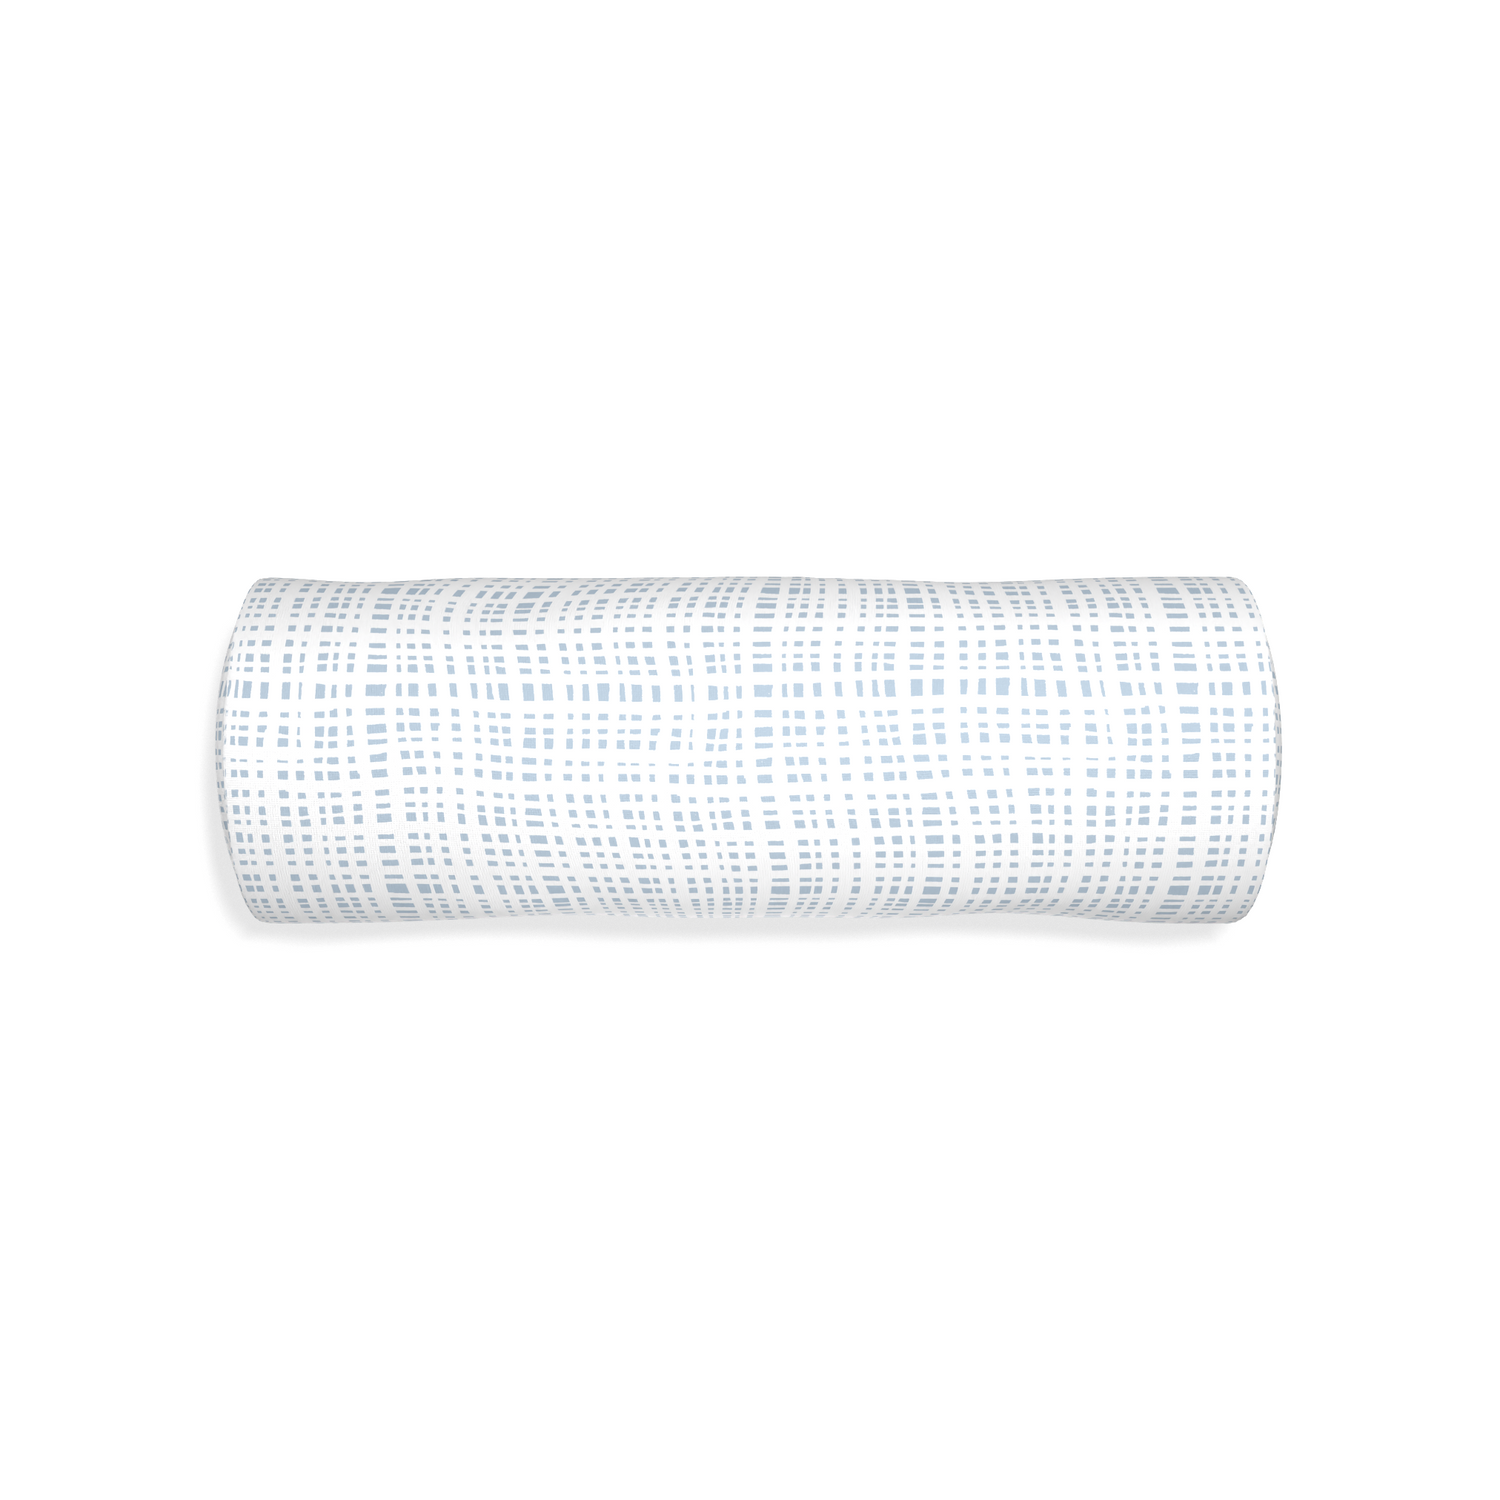 Bolster ginger custom plaid sky bluepillow with none on white background